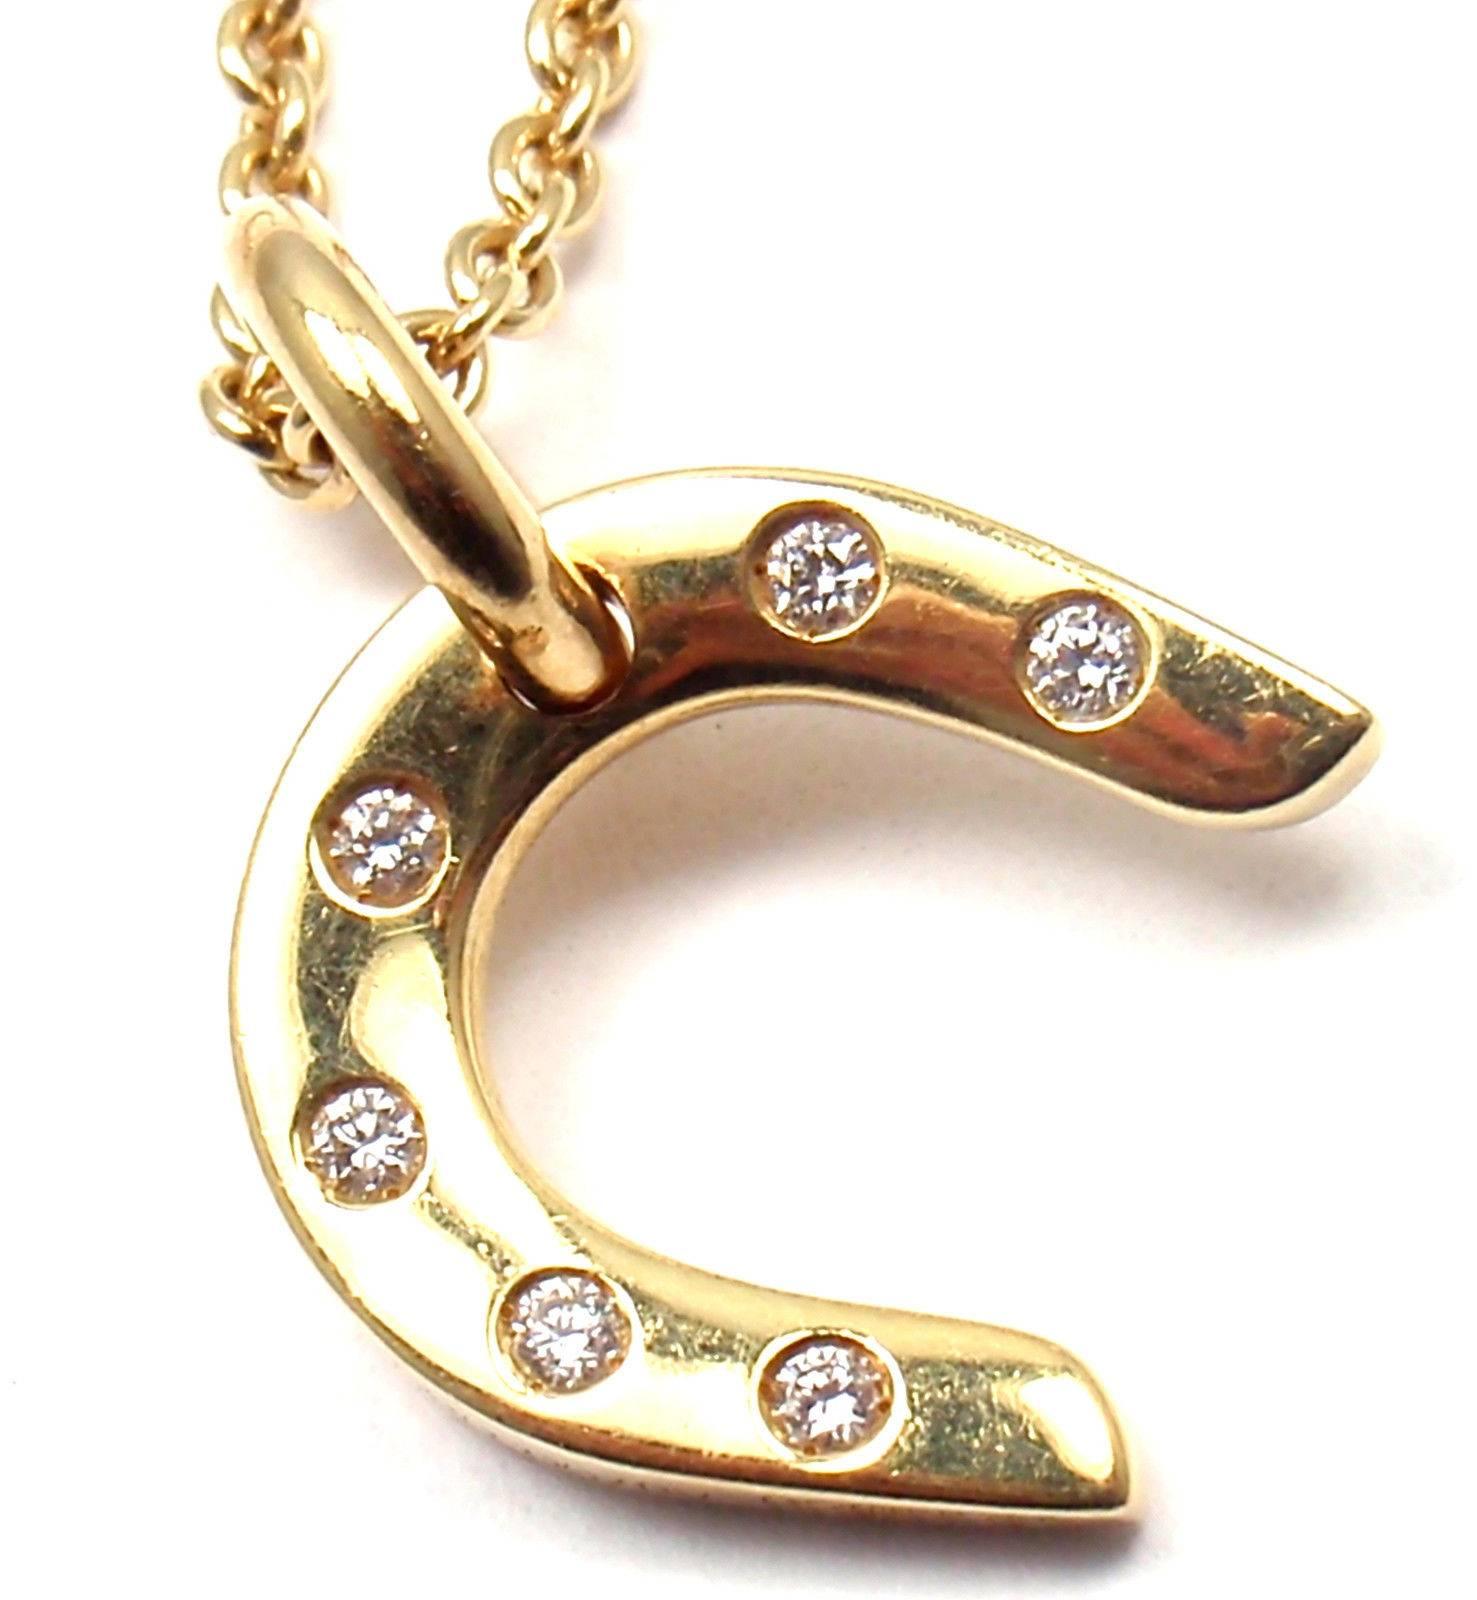 18k Yellow Gold Diamond Horseshoe Pendant Necklace by Hermes. 
With 6 Round Brilliant Cut Diamonds, VS1 Clarity, G Color. 
Total Diamond Weight approx. .12ct. 

Details: 
Length: 19''
Width: 2mm
Weight: 11.1 grams
Pendant Size: 19mm x 14mm
Stamped